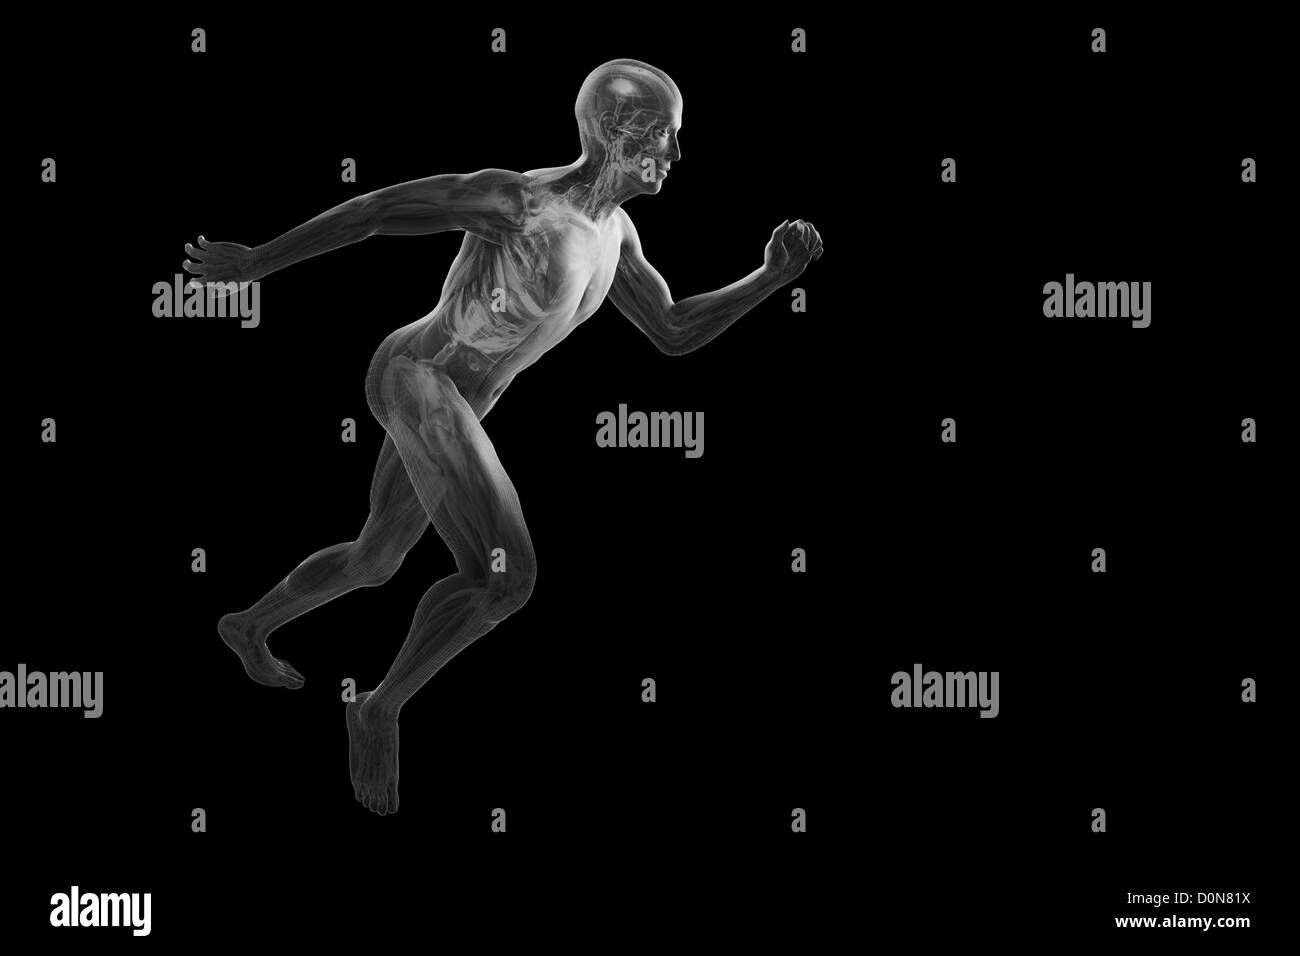 A running male figure with transparent skin to reveal the inner anatomical structures. Stock Photo